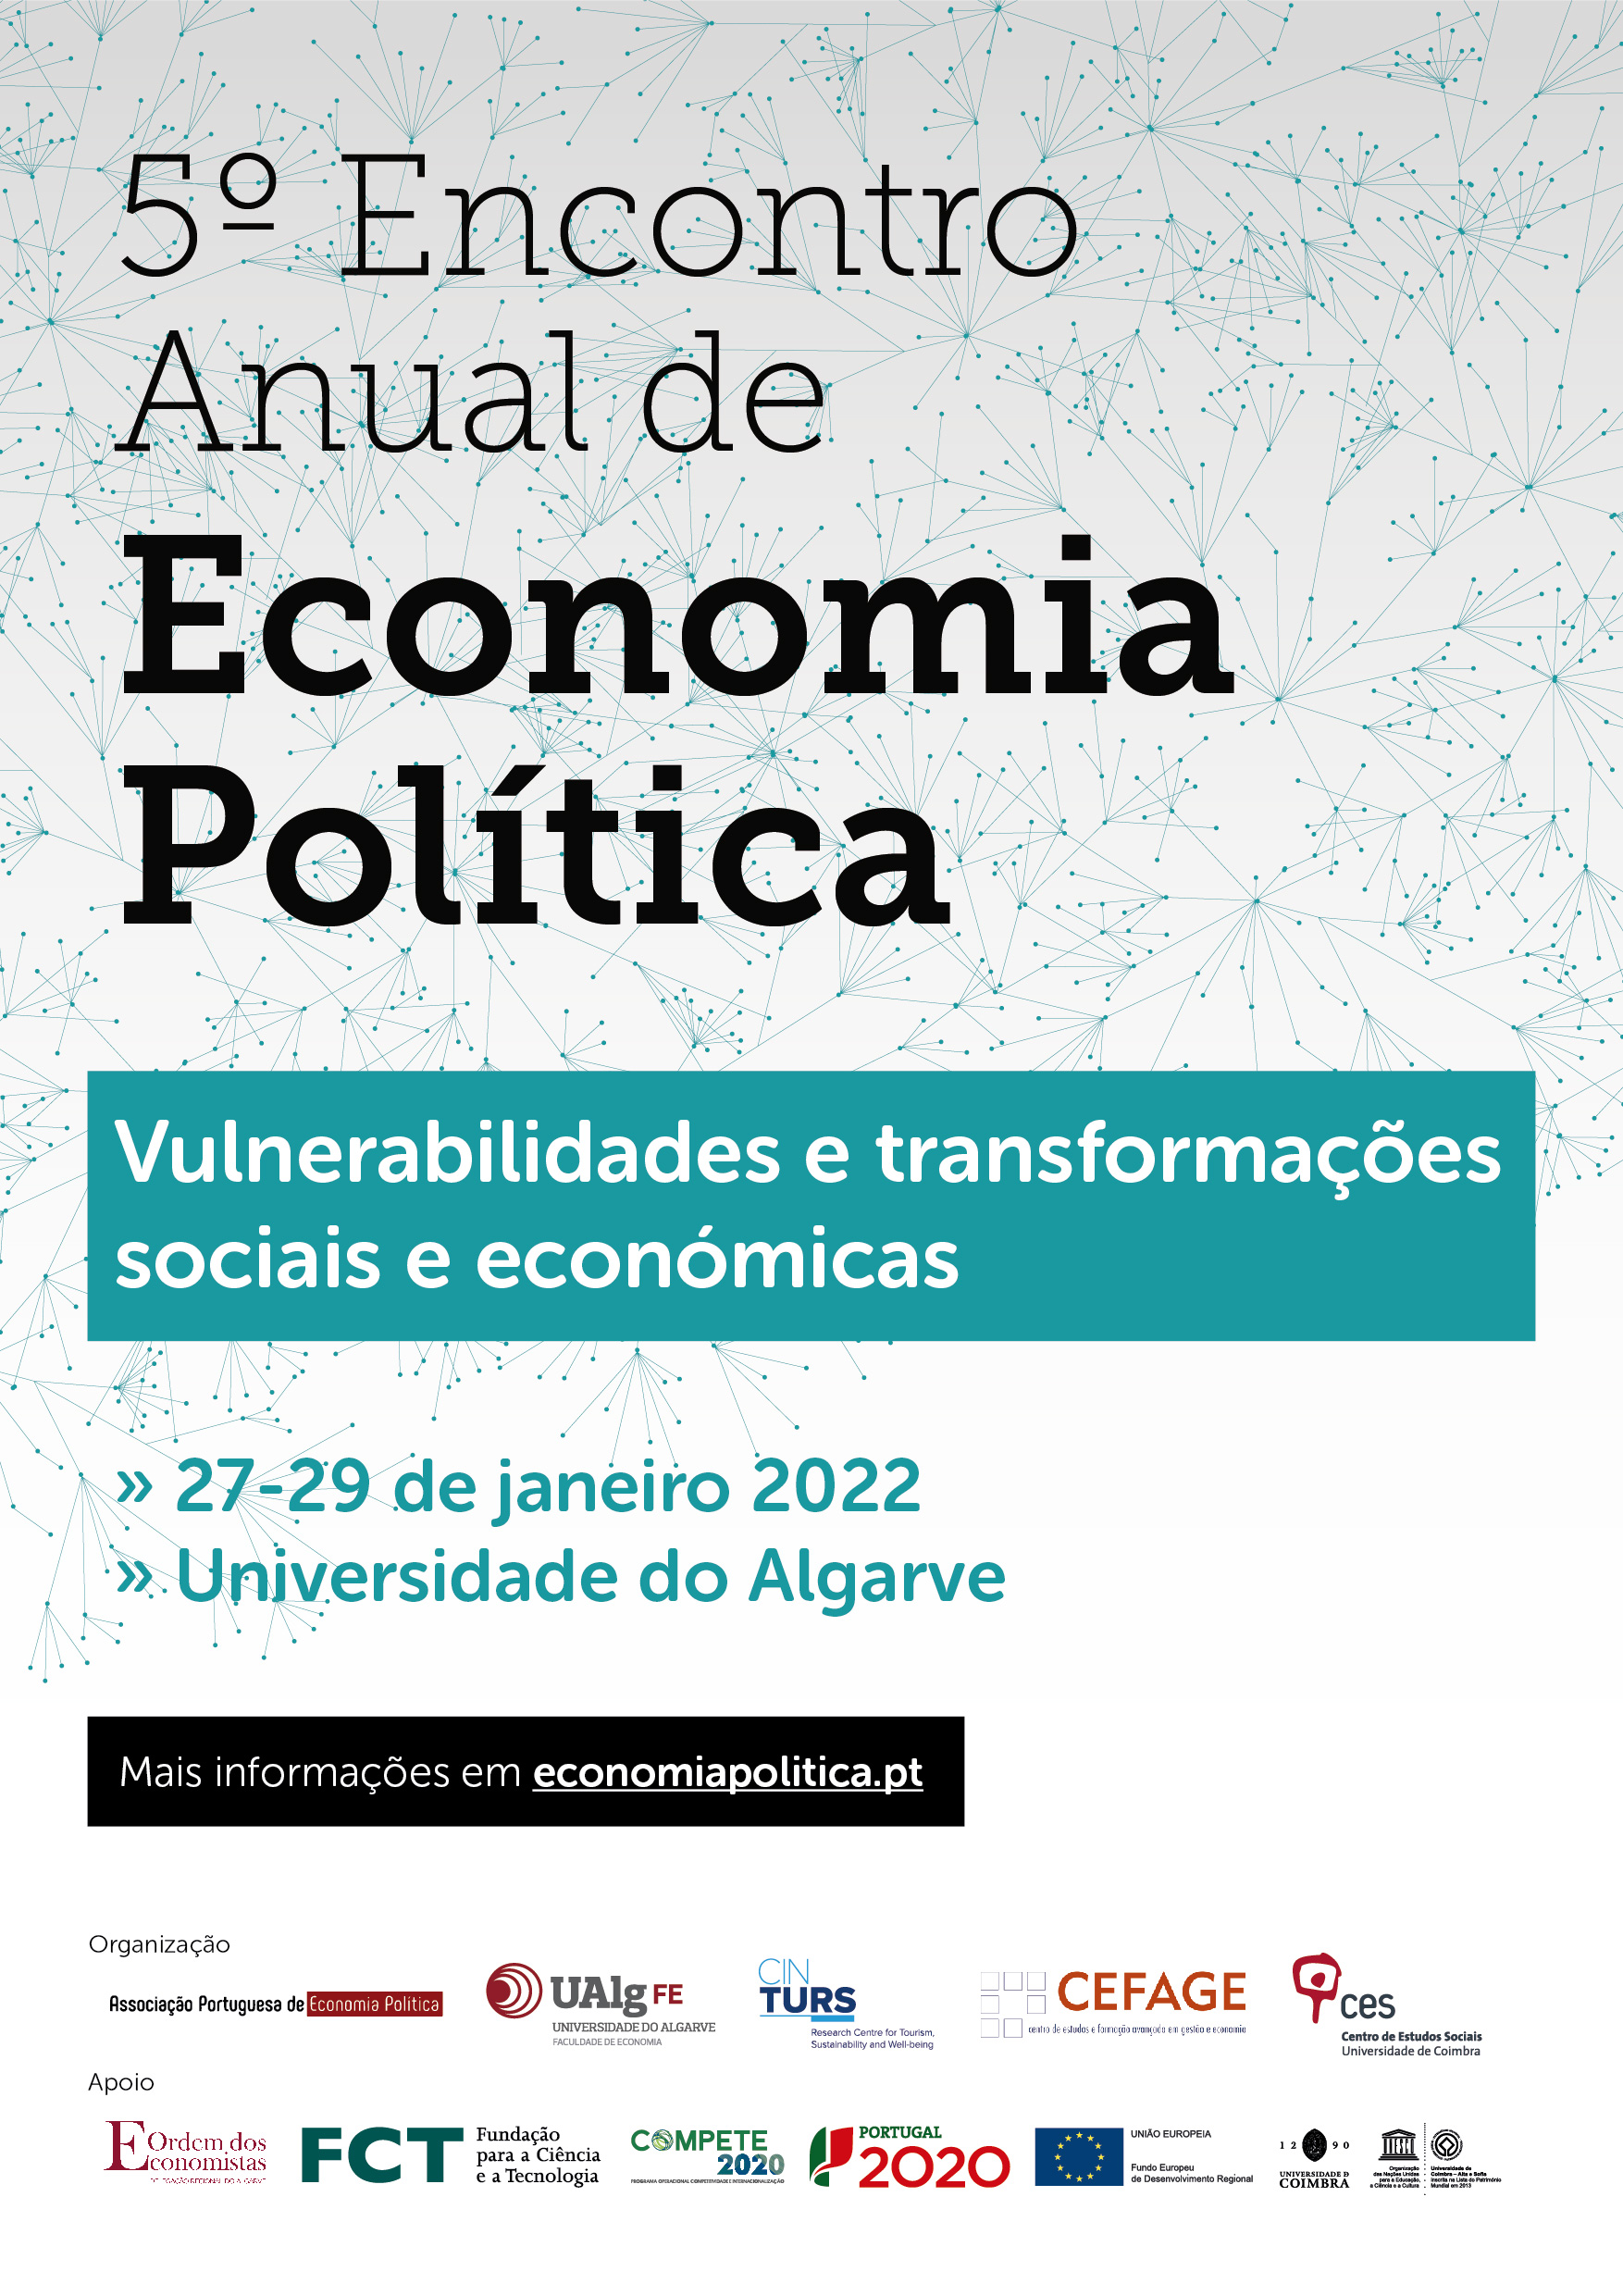 Social and economic vulnerabilities and transformations<span id="edit_34893"><script>$(function() { $('#edit_34893').load( "/myces/user/editobj.php?tipo=evento&id=34893" ); });</script></span>